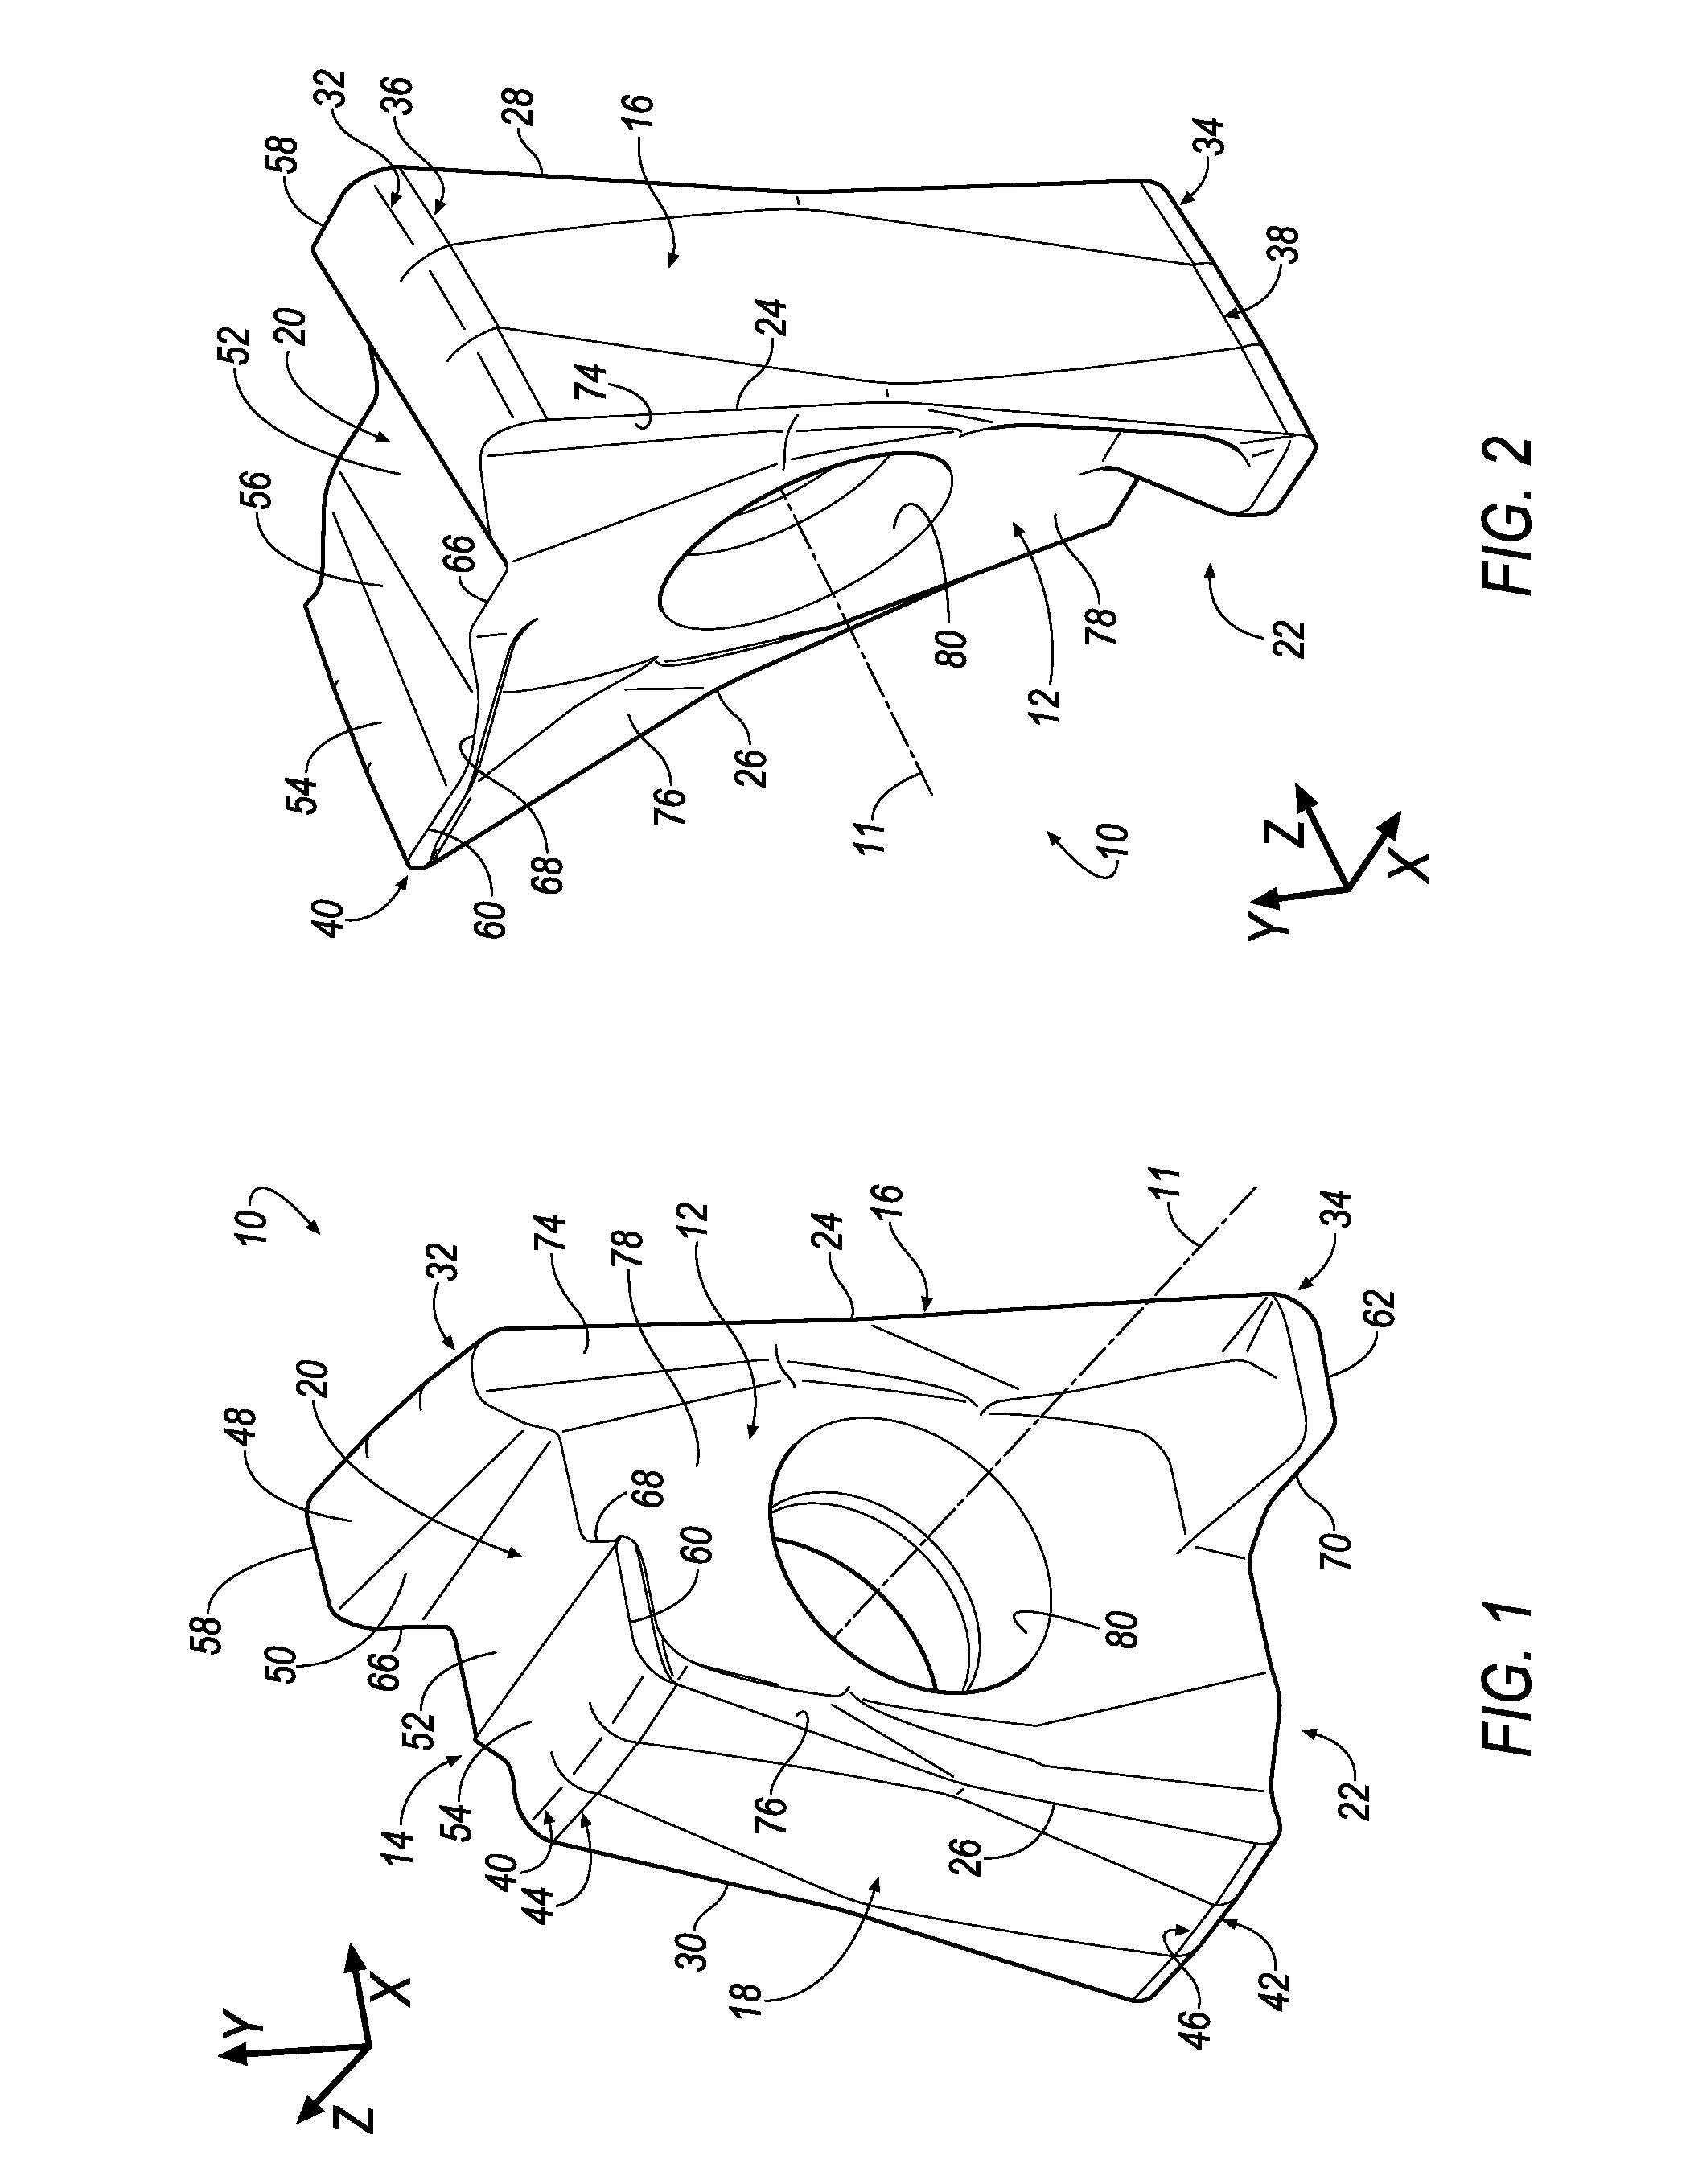 Double-sided, indexable cutting insert with ramping capability and cutting tool therefor